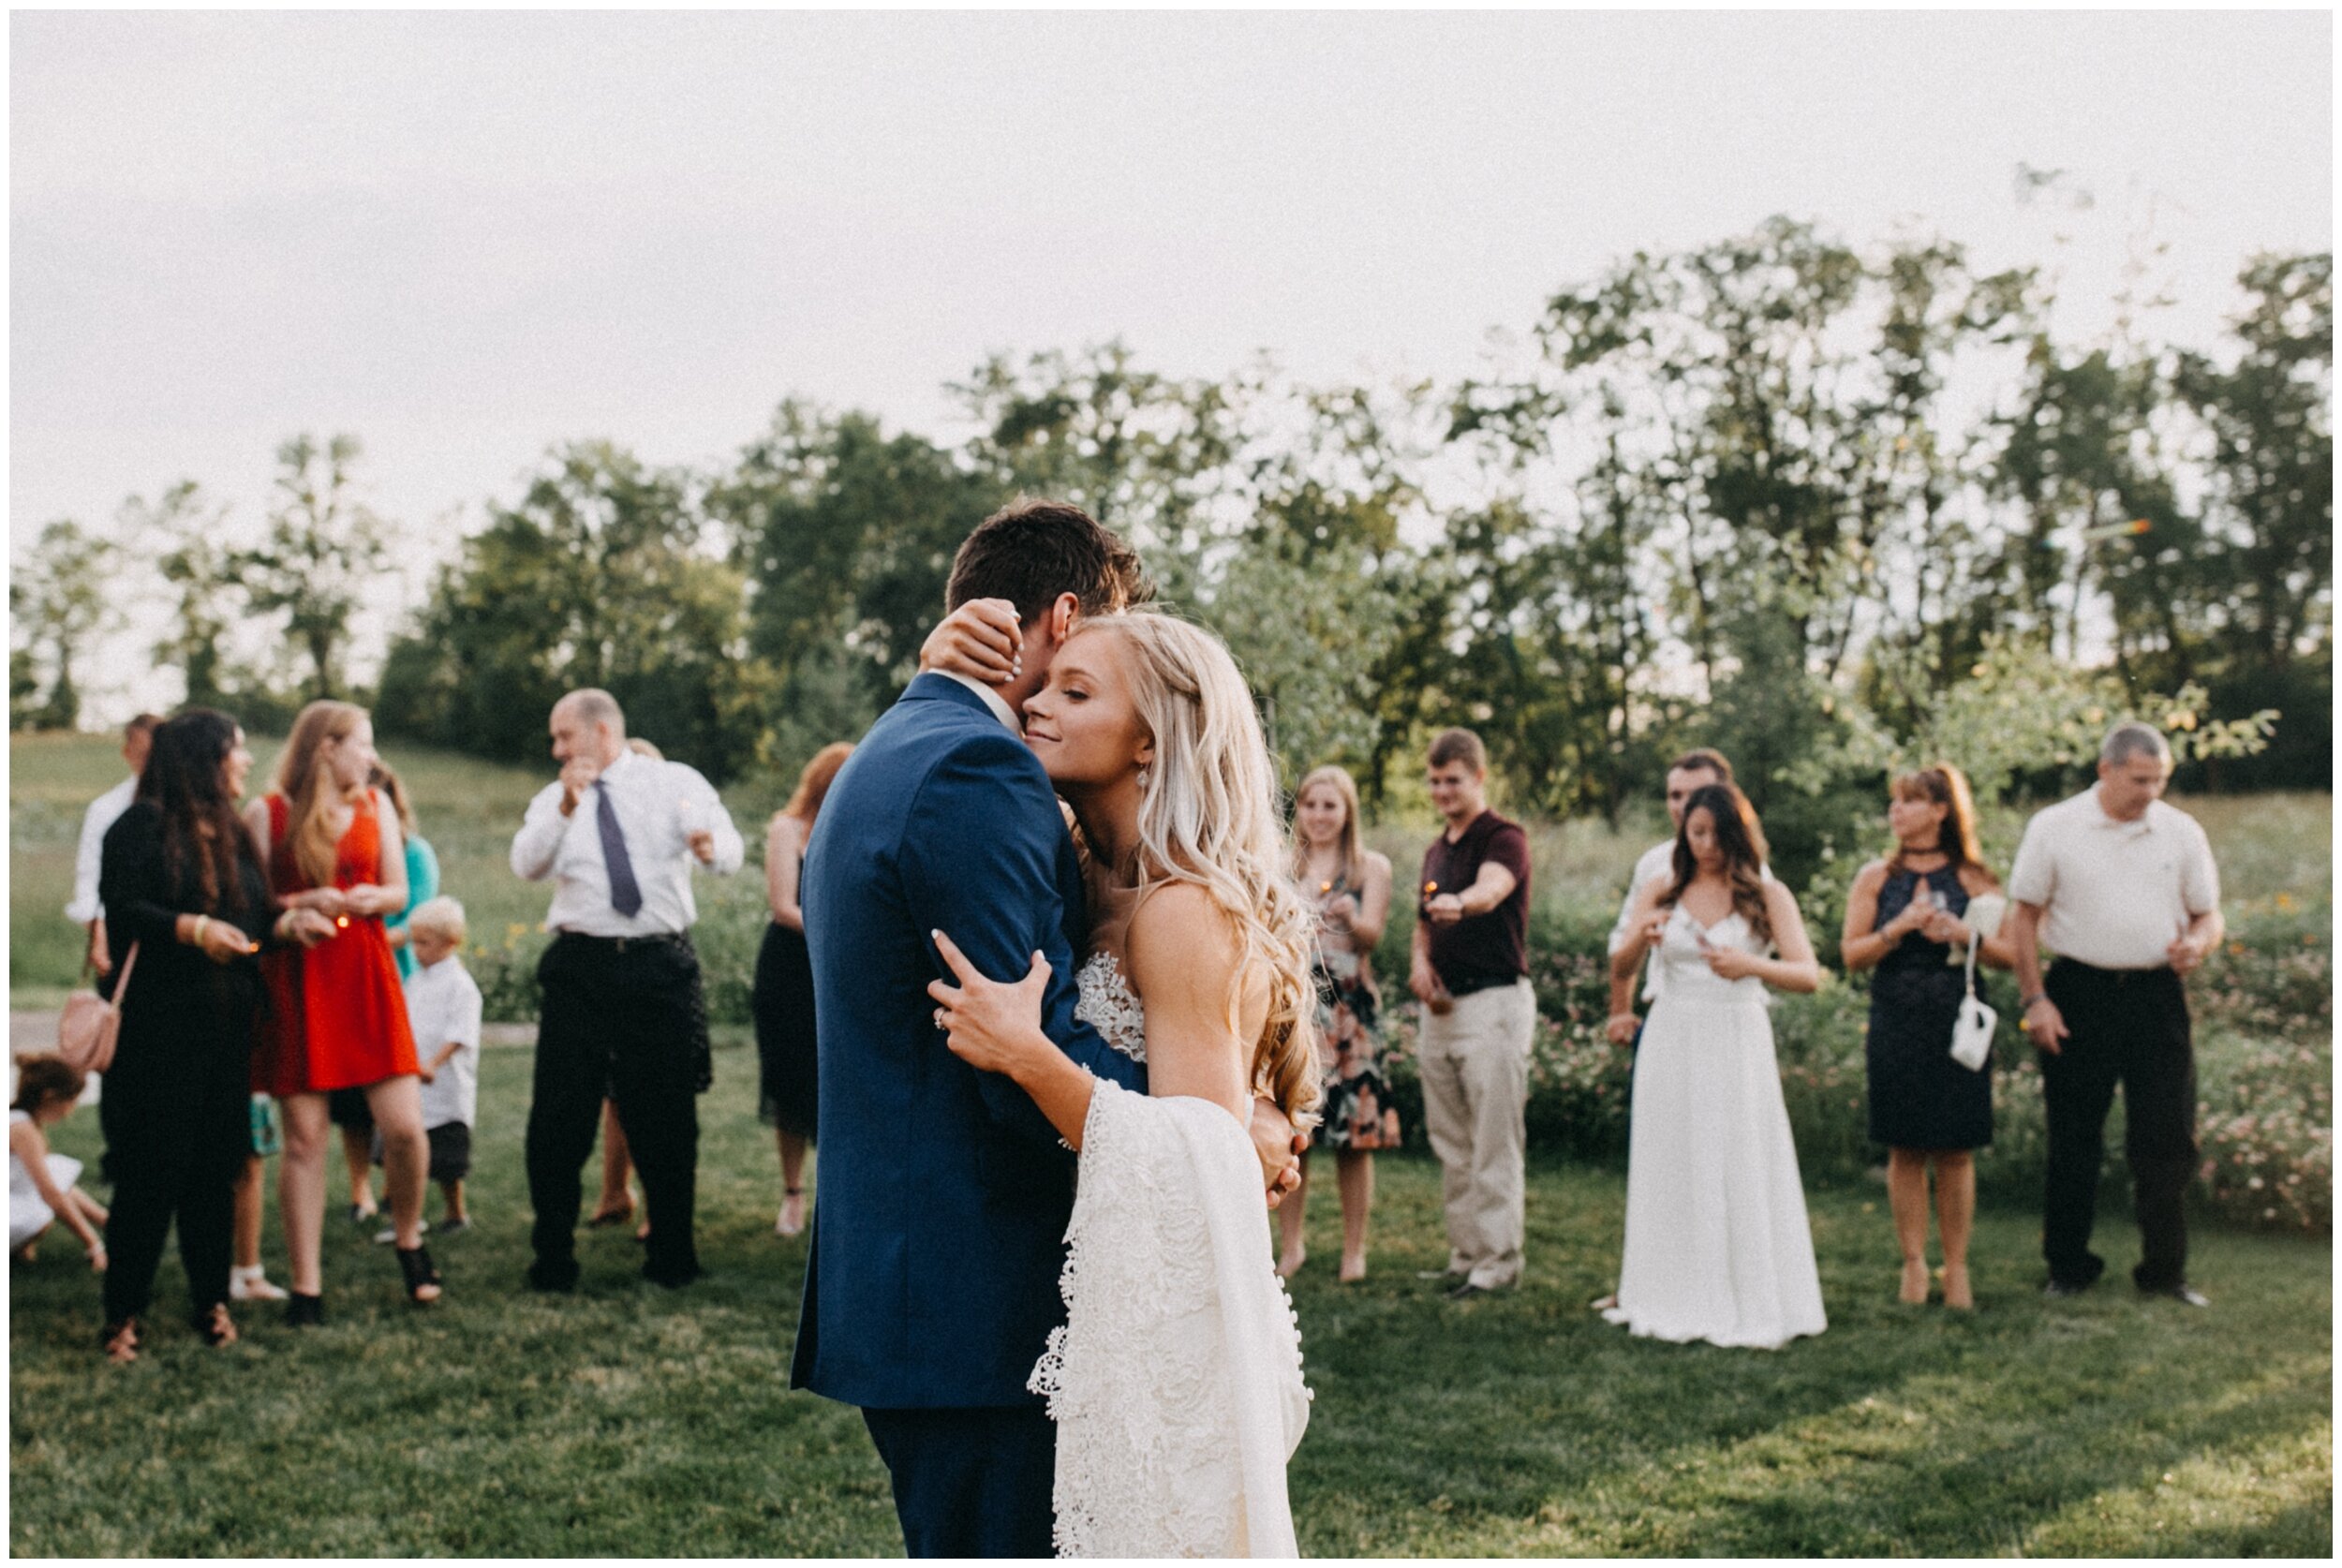 Outdoor dance with sparklers at Minnesota barn wedding